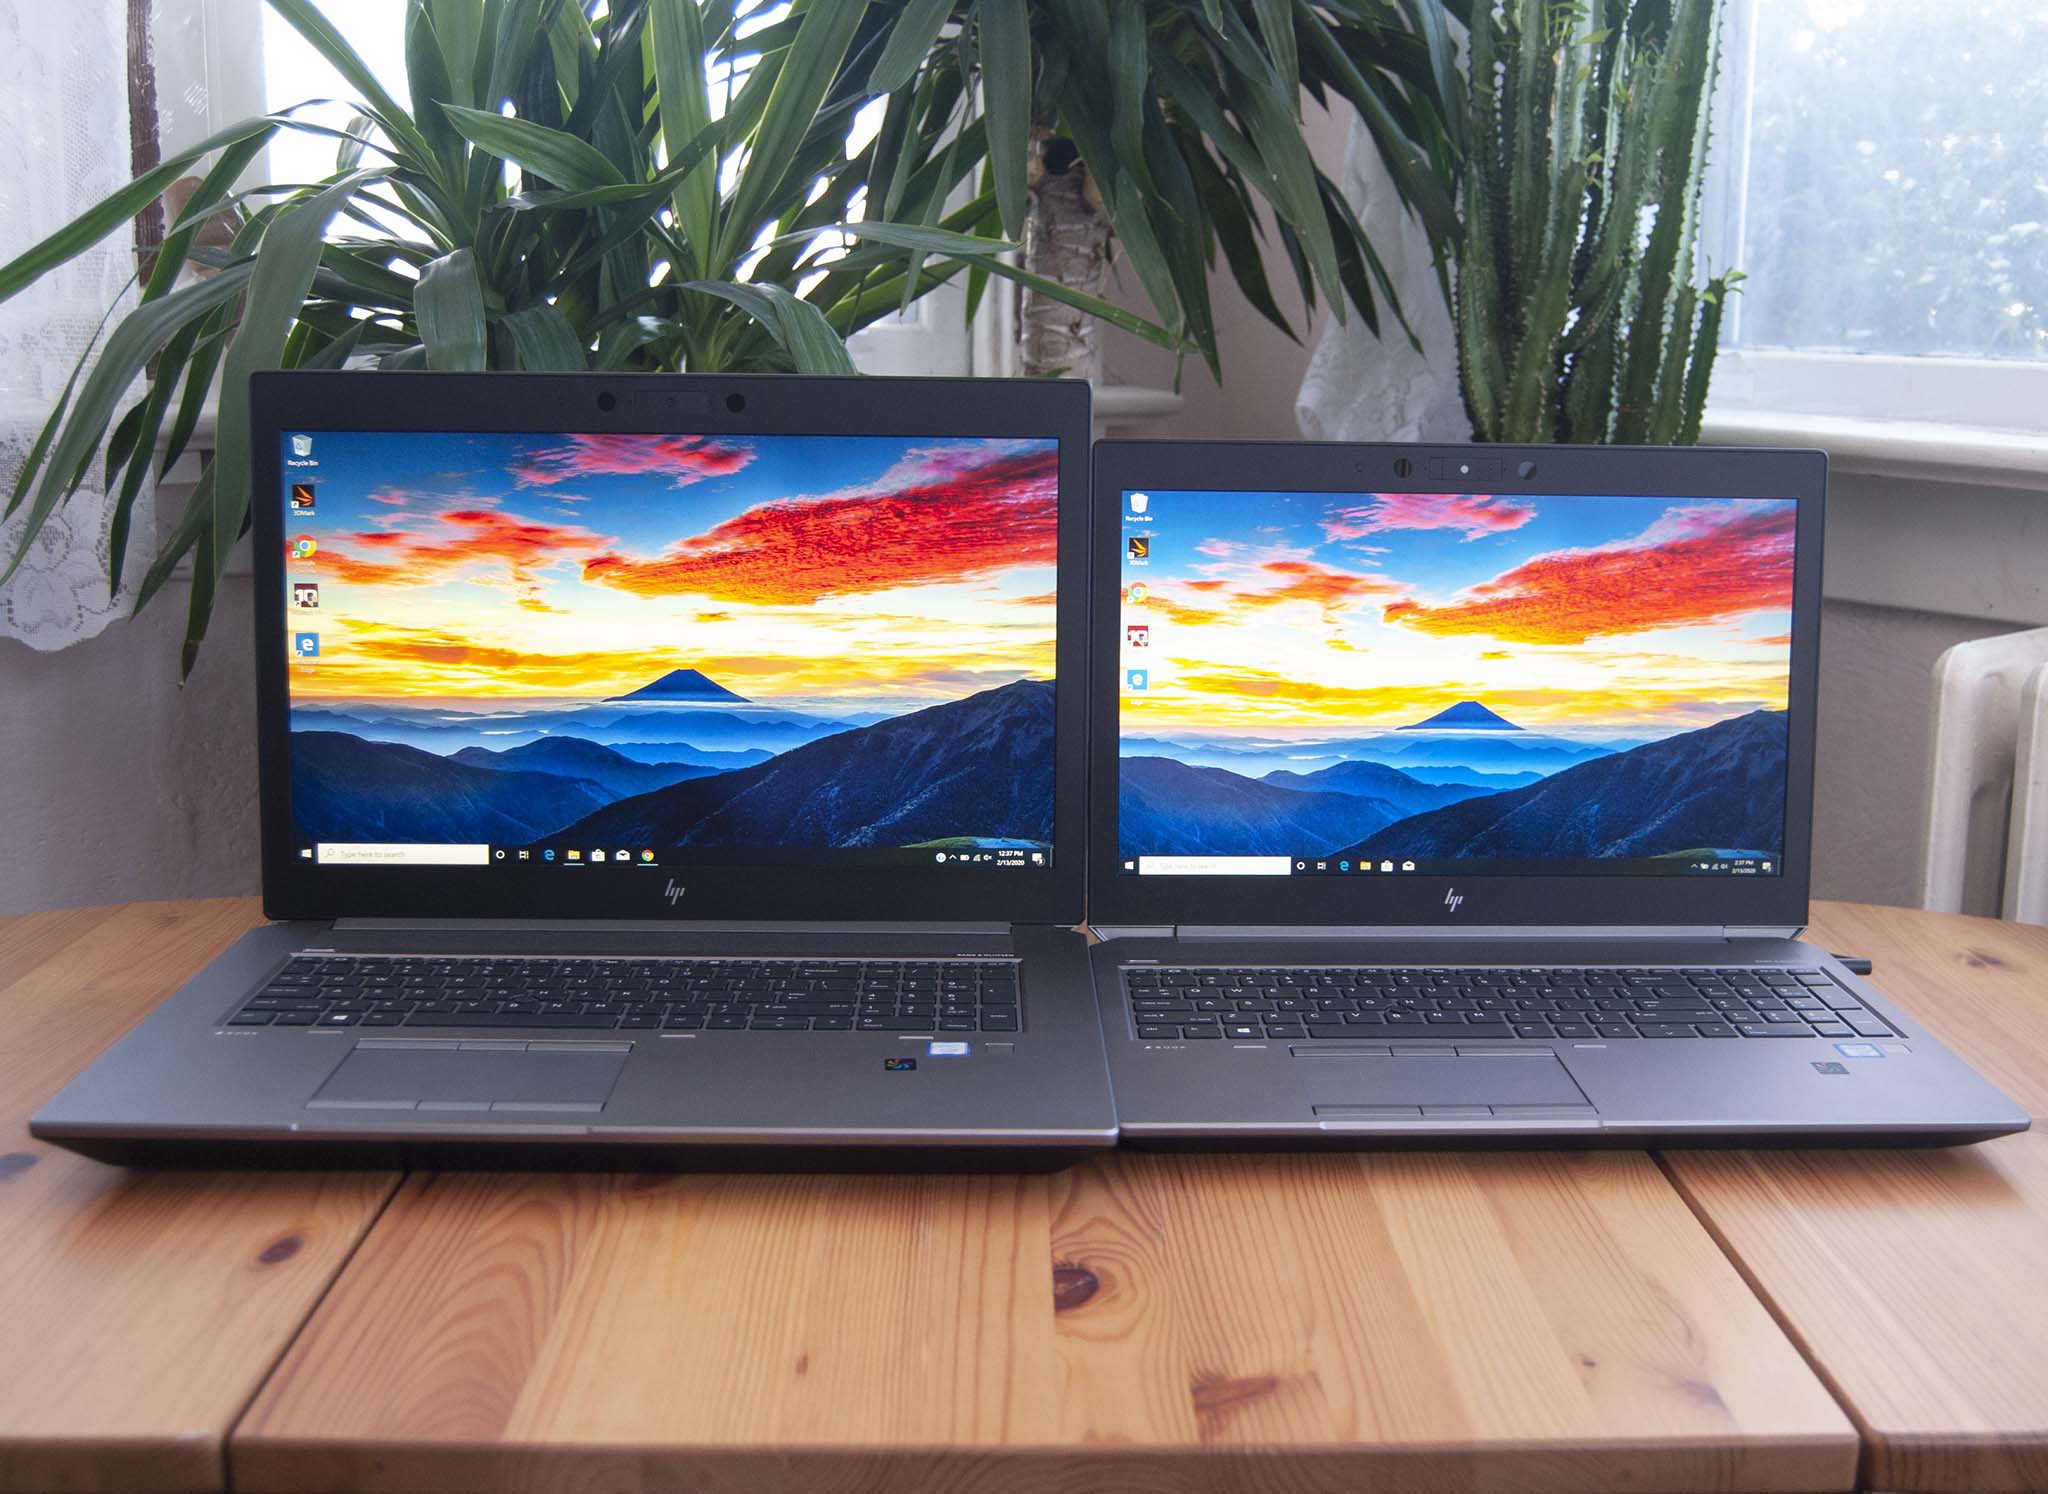 HP ZBook 15 and 17 G6 dual review: Two workstations that muscle, durability, and DreamColor display Windows Central